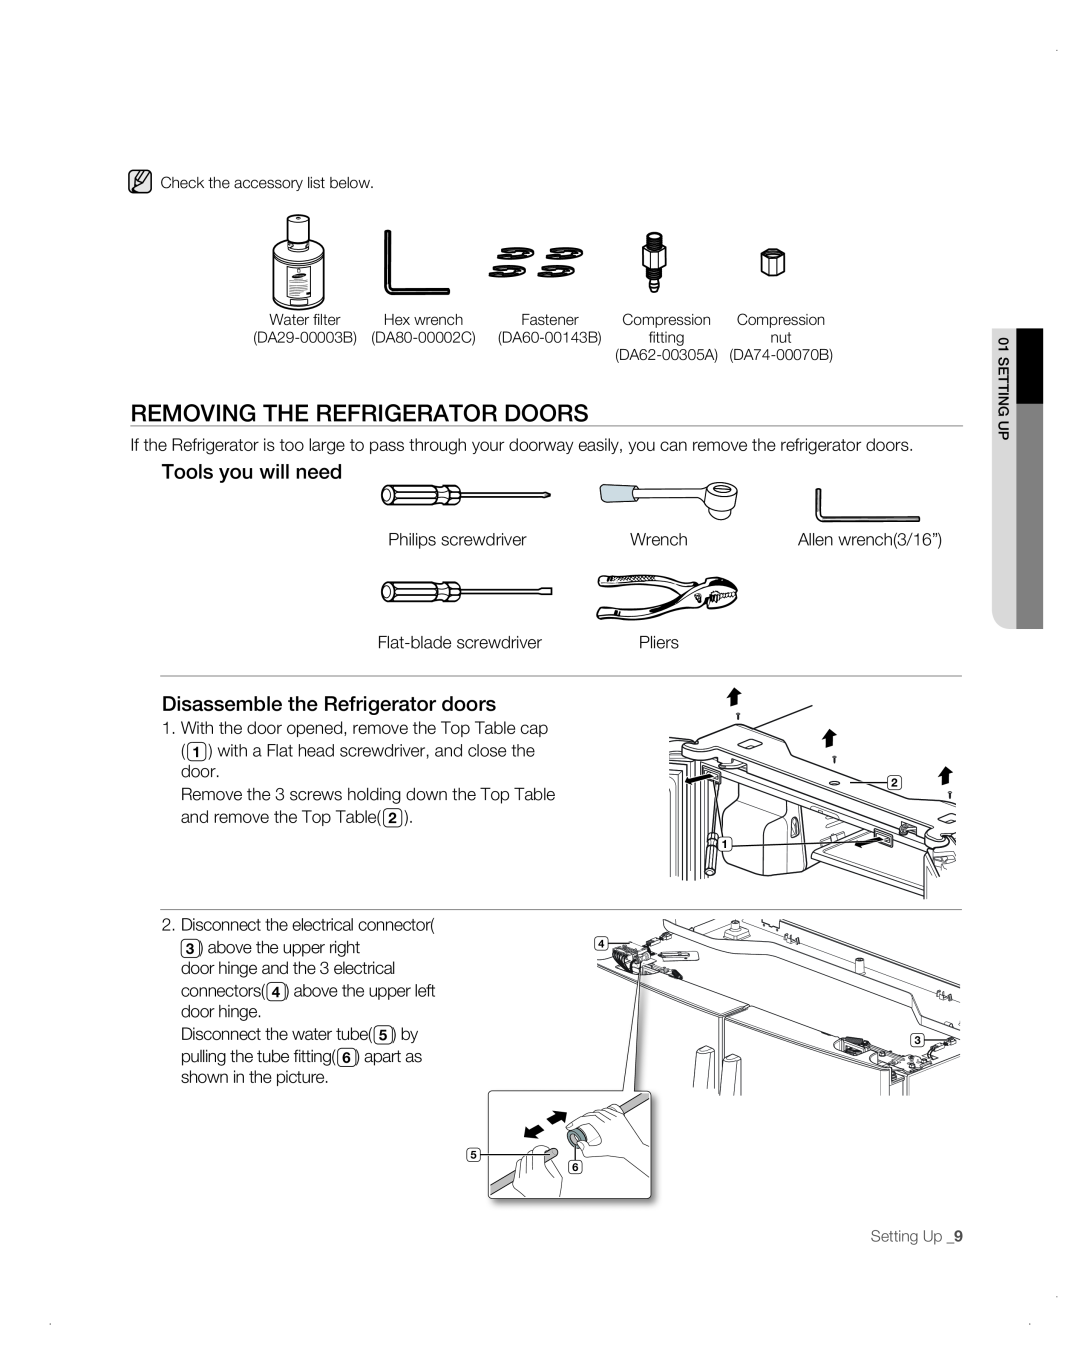 Samsung RF26VAB user manual Removing the refrigerator doors, Tools you will need, Disassemble the Refrigerator doors 